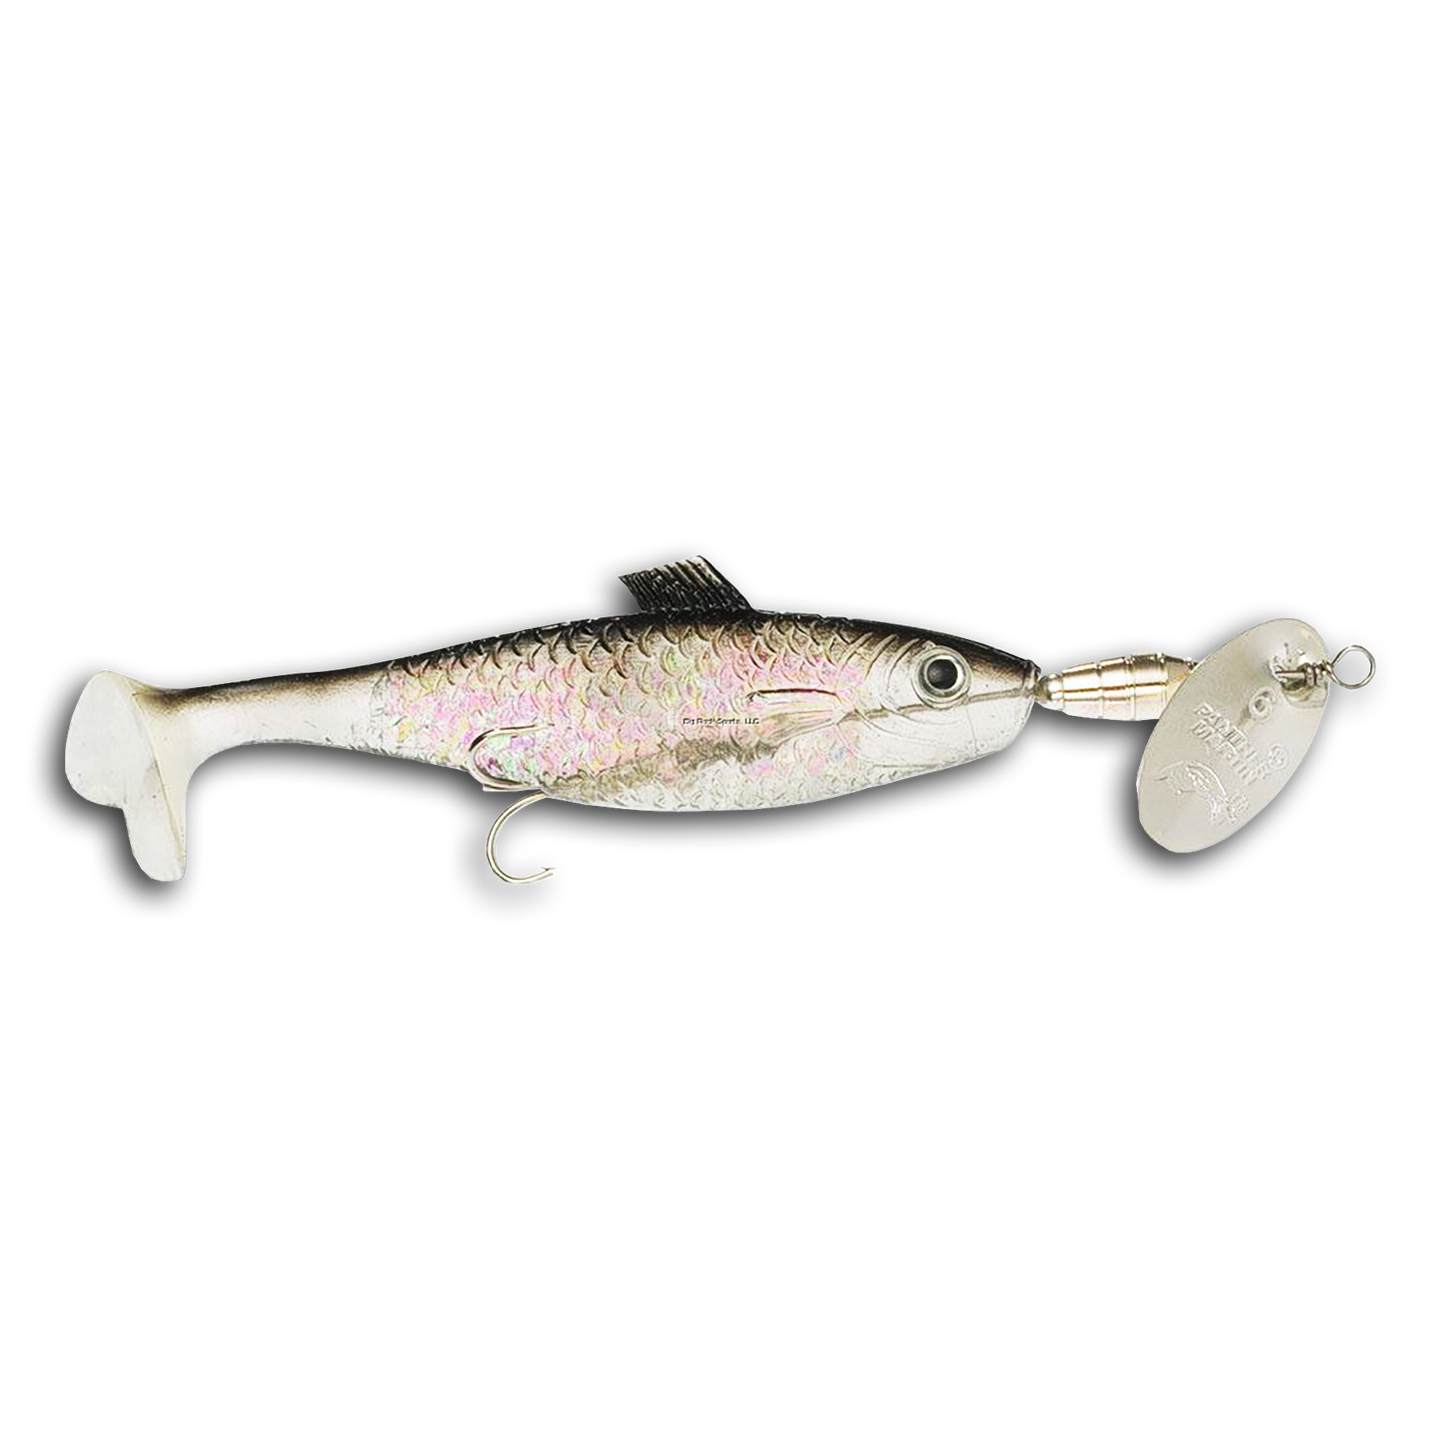 2" PANTHER MARTIN VIVIF STYLE MINNOW SPINNER